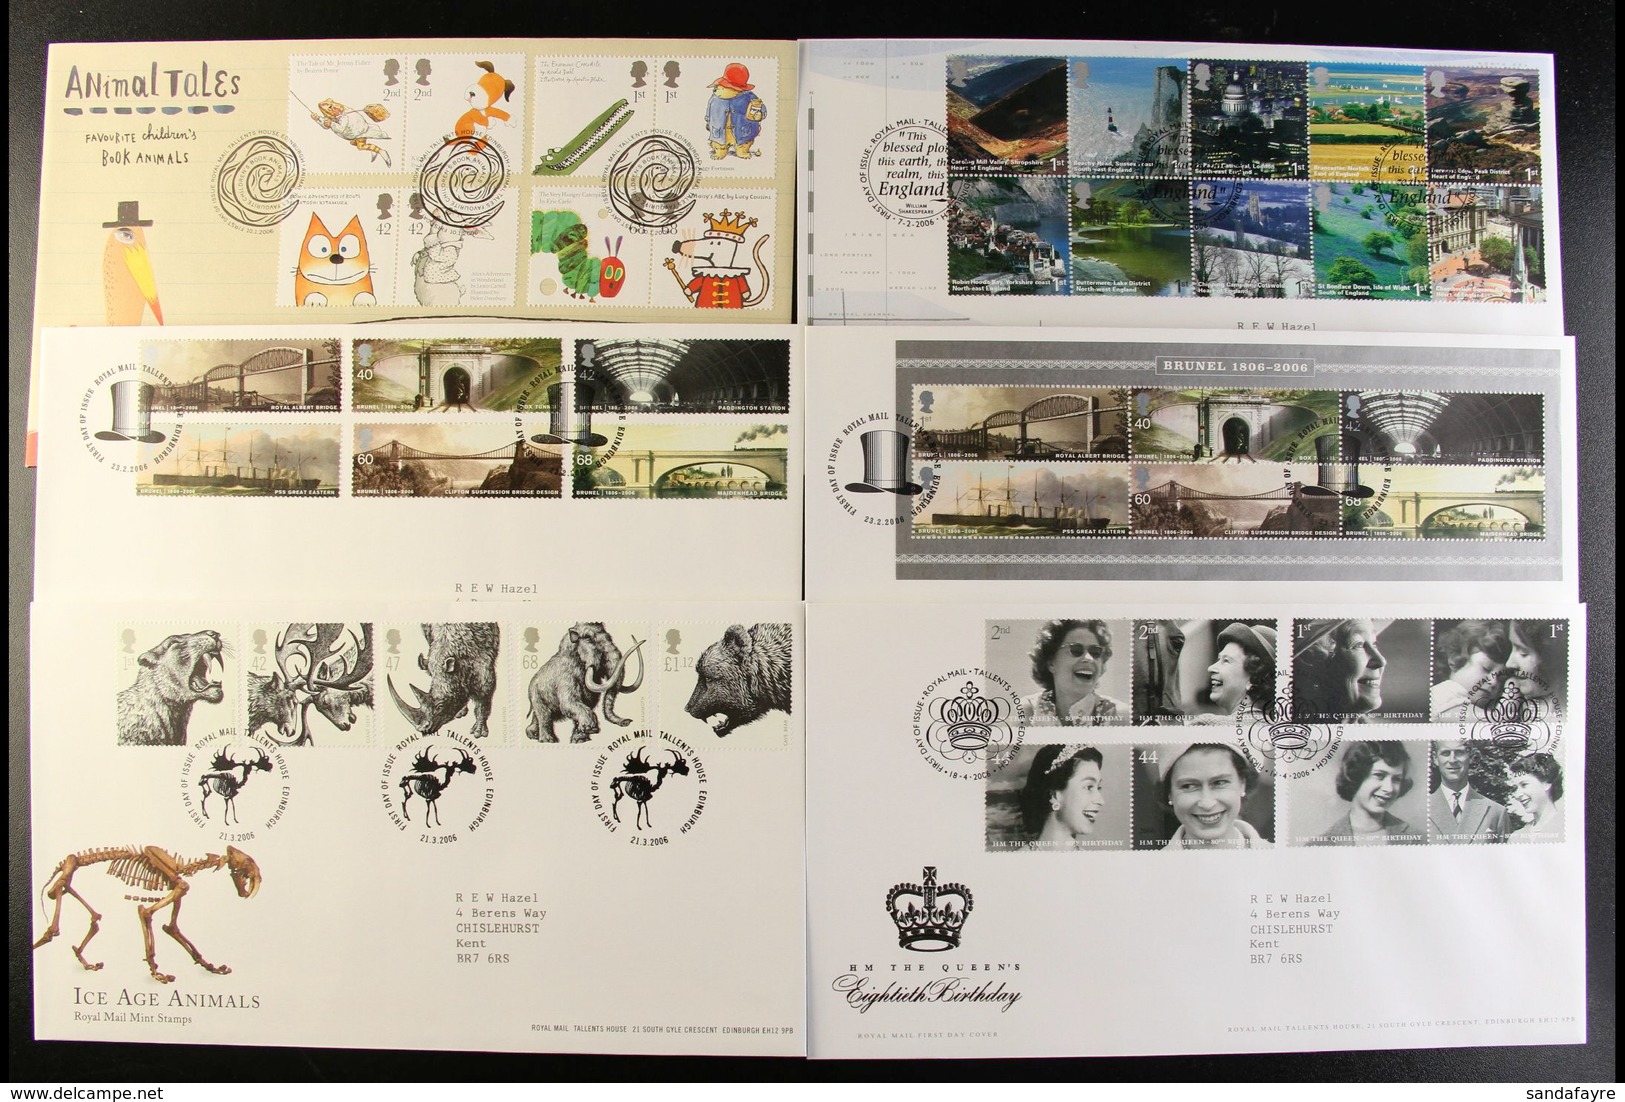 2006 COMPLETE YEAR SET For Commemorative Issues, All On Illustrated Covers With Neat Typed Address, And Includes The "Co - FDC